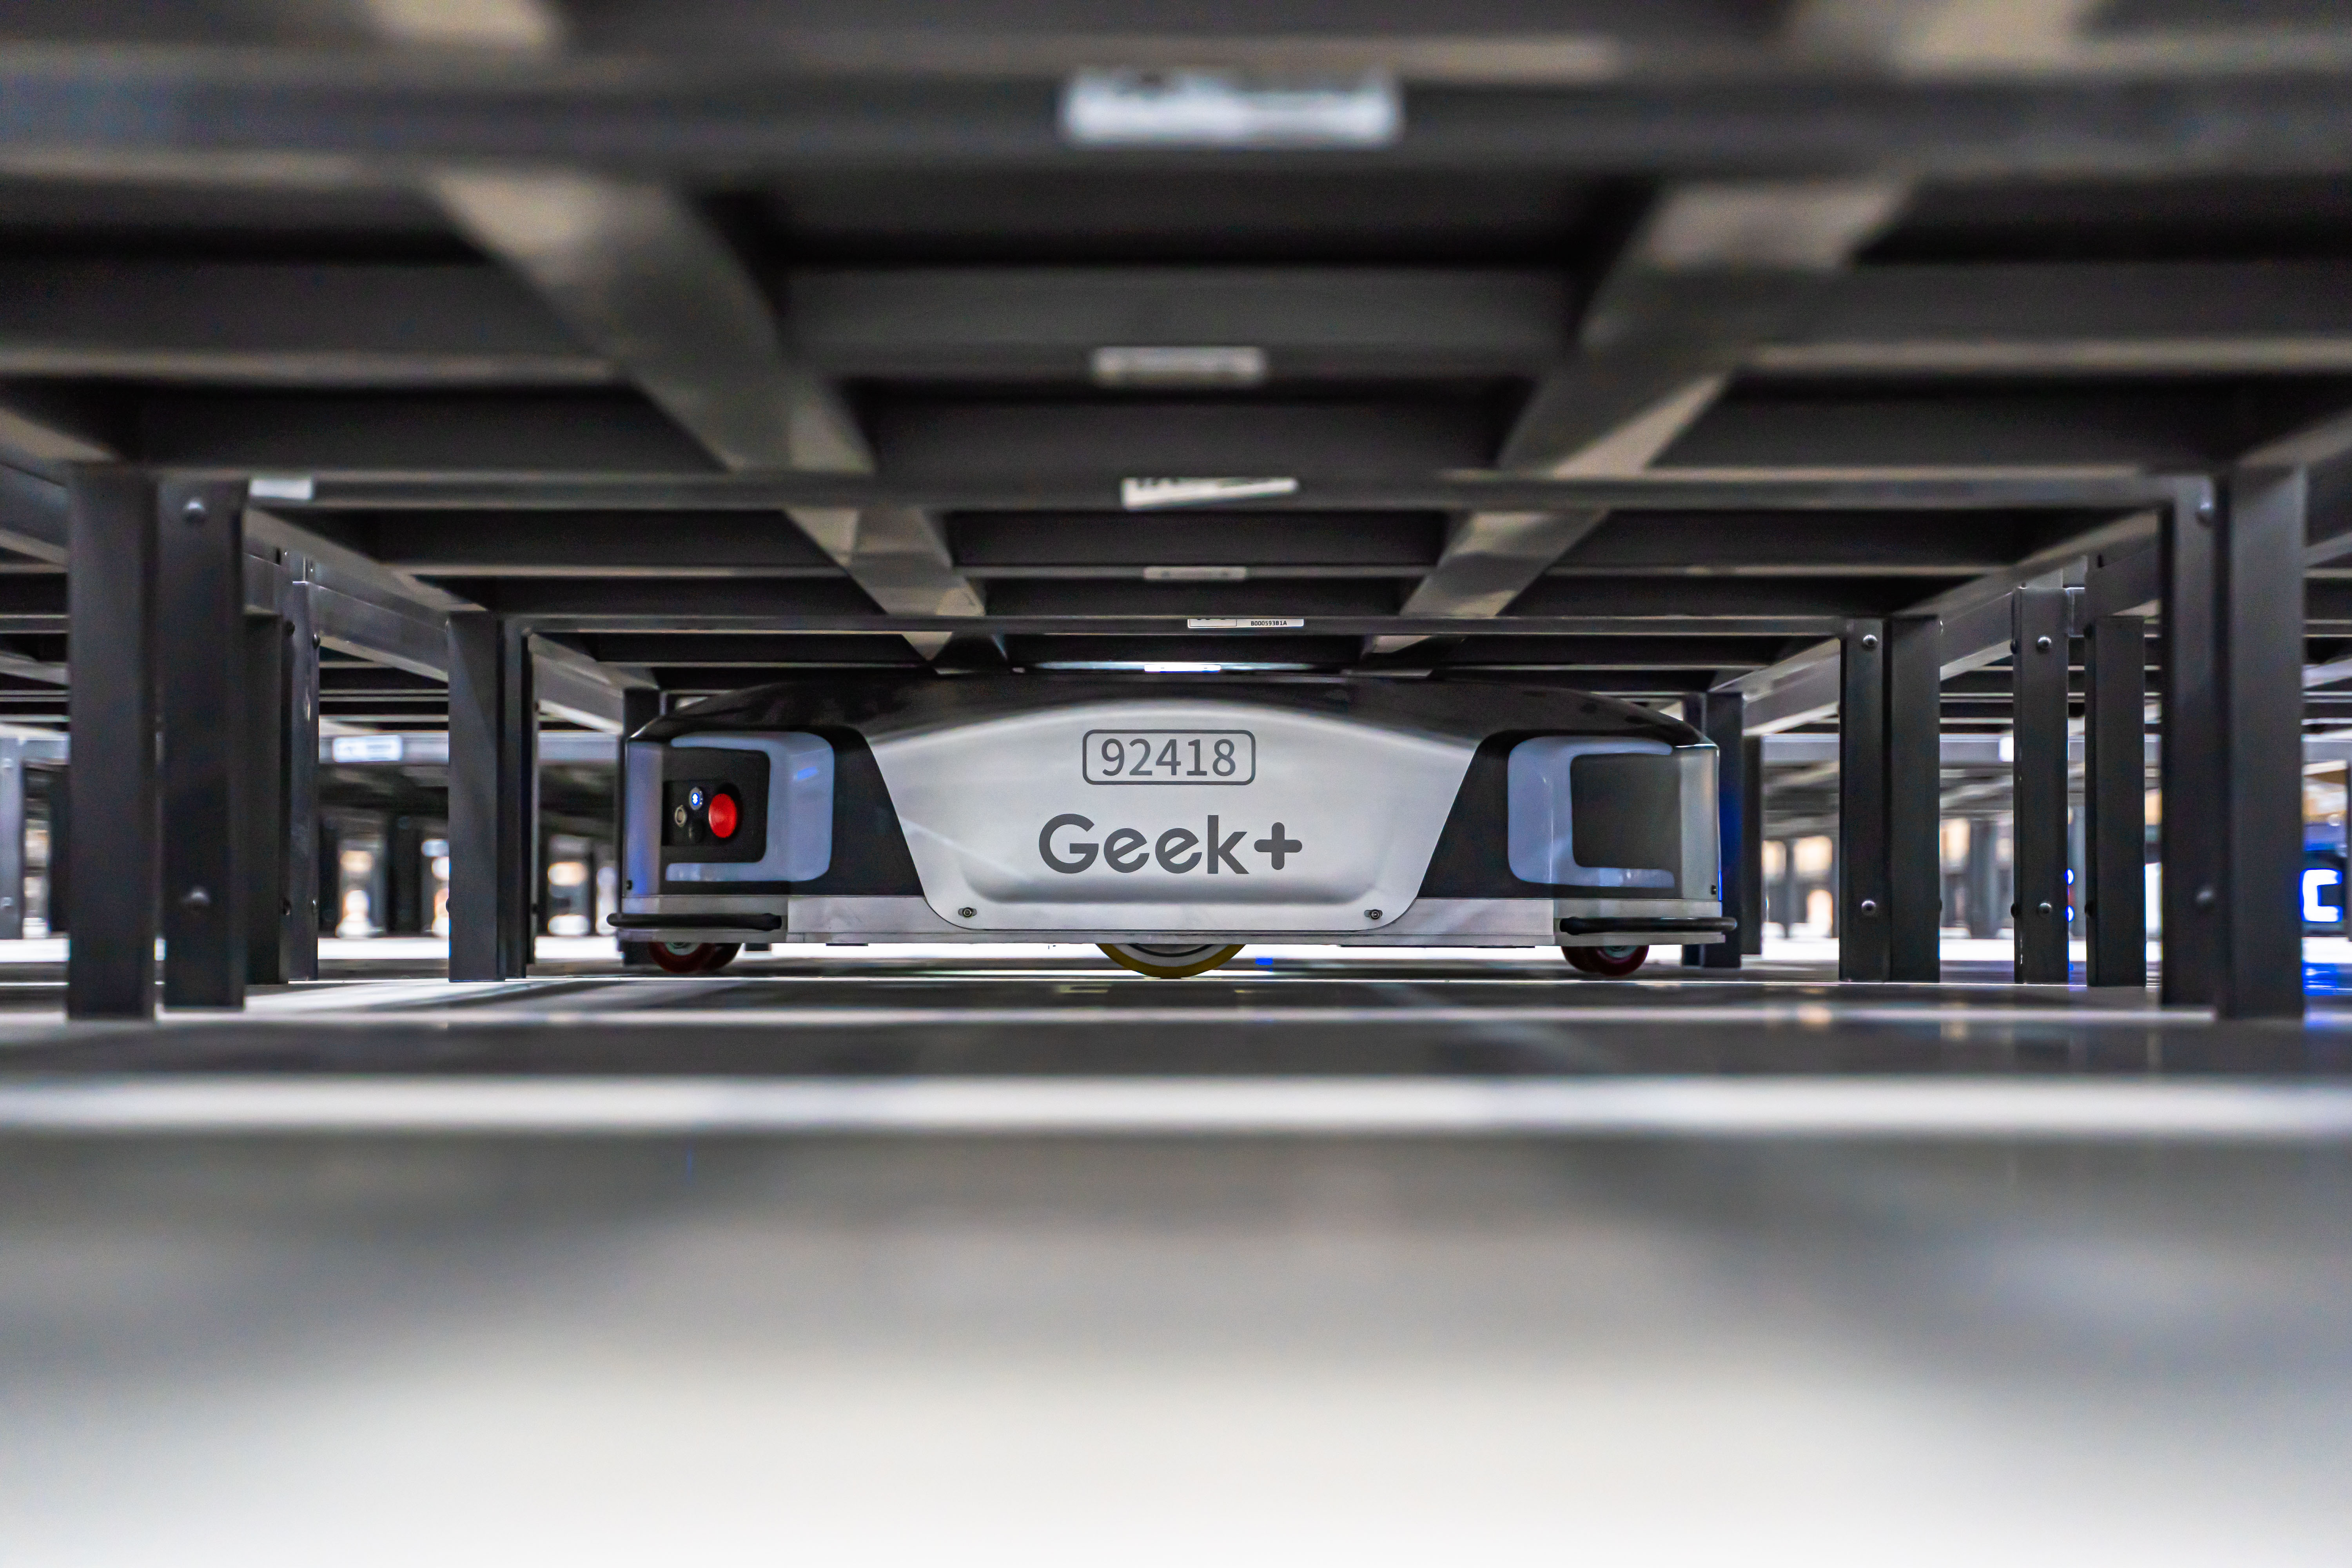 Radial Announces the Opening of Second Fulfillment Center in Indianapolis, Indiana and Selects Geek+ to Automate Site Operations